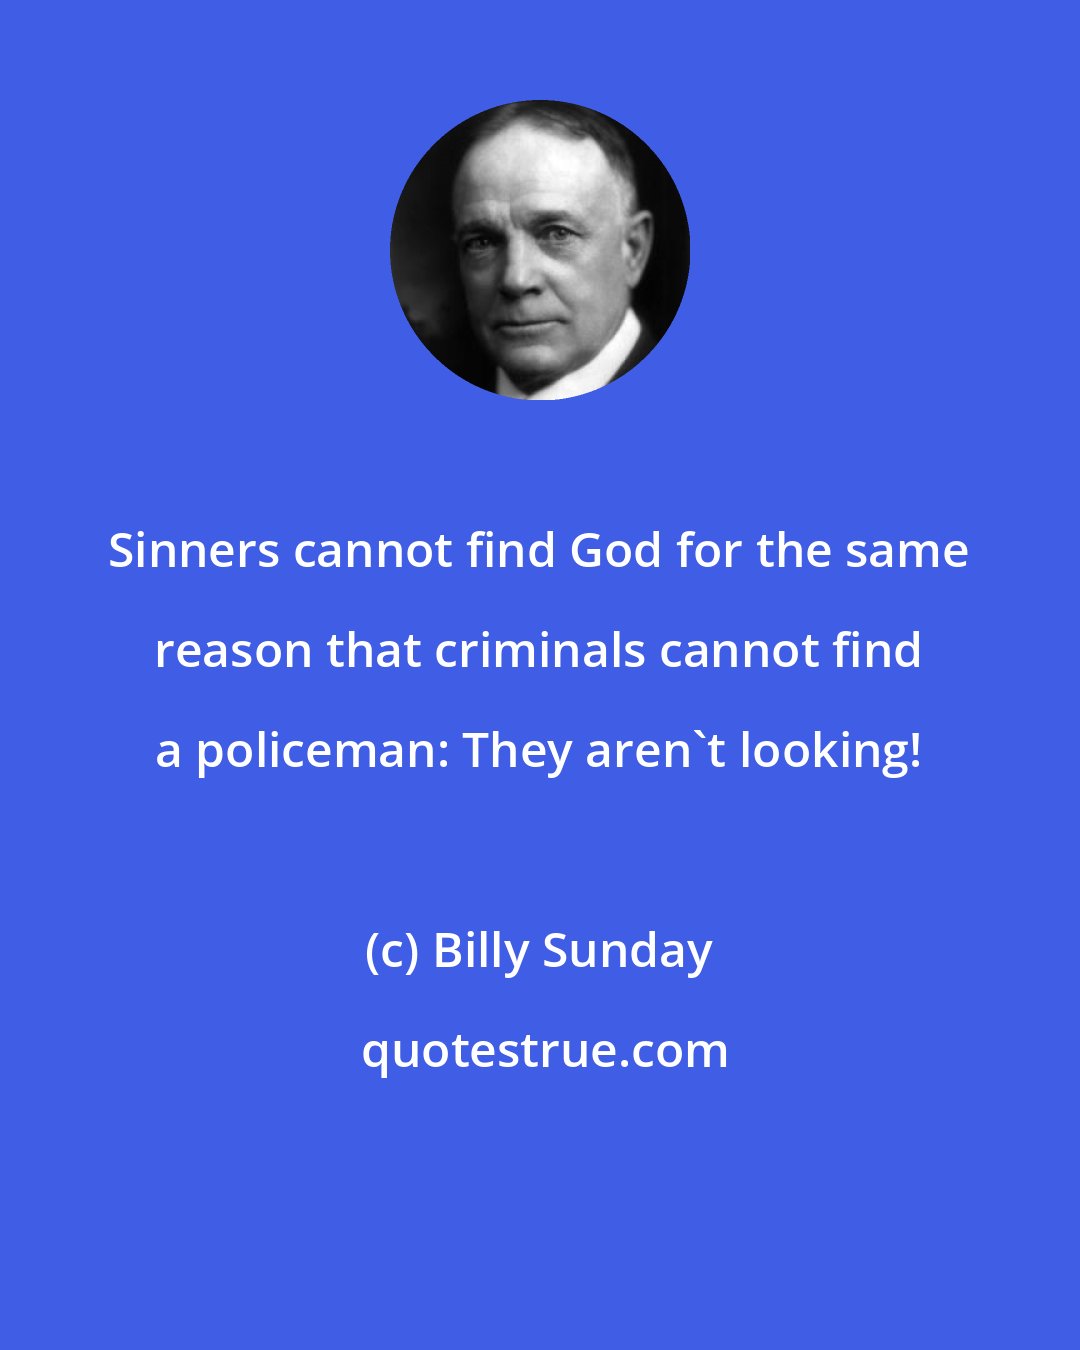 Billy Sunday: Sinners cannot find God for the same reason that criminals cannot find a policeman: They aren't looking!